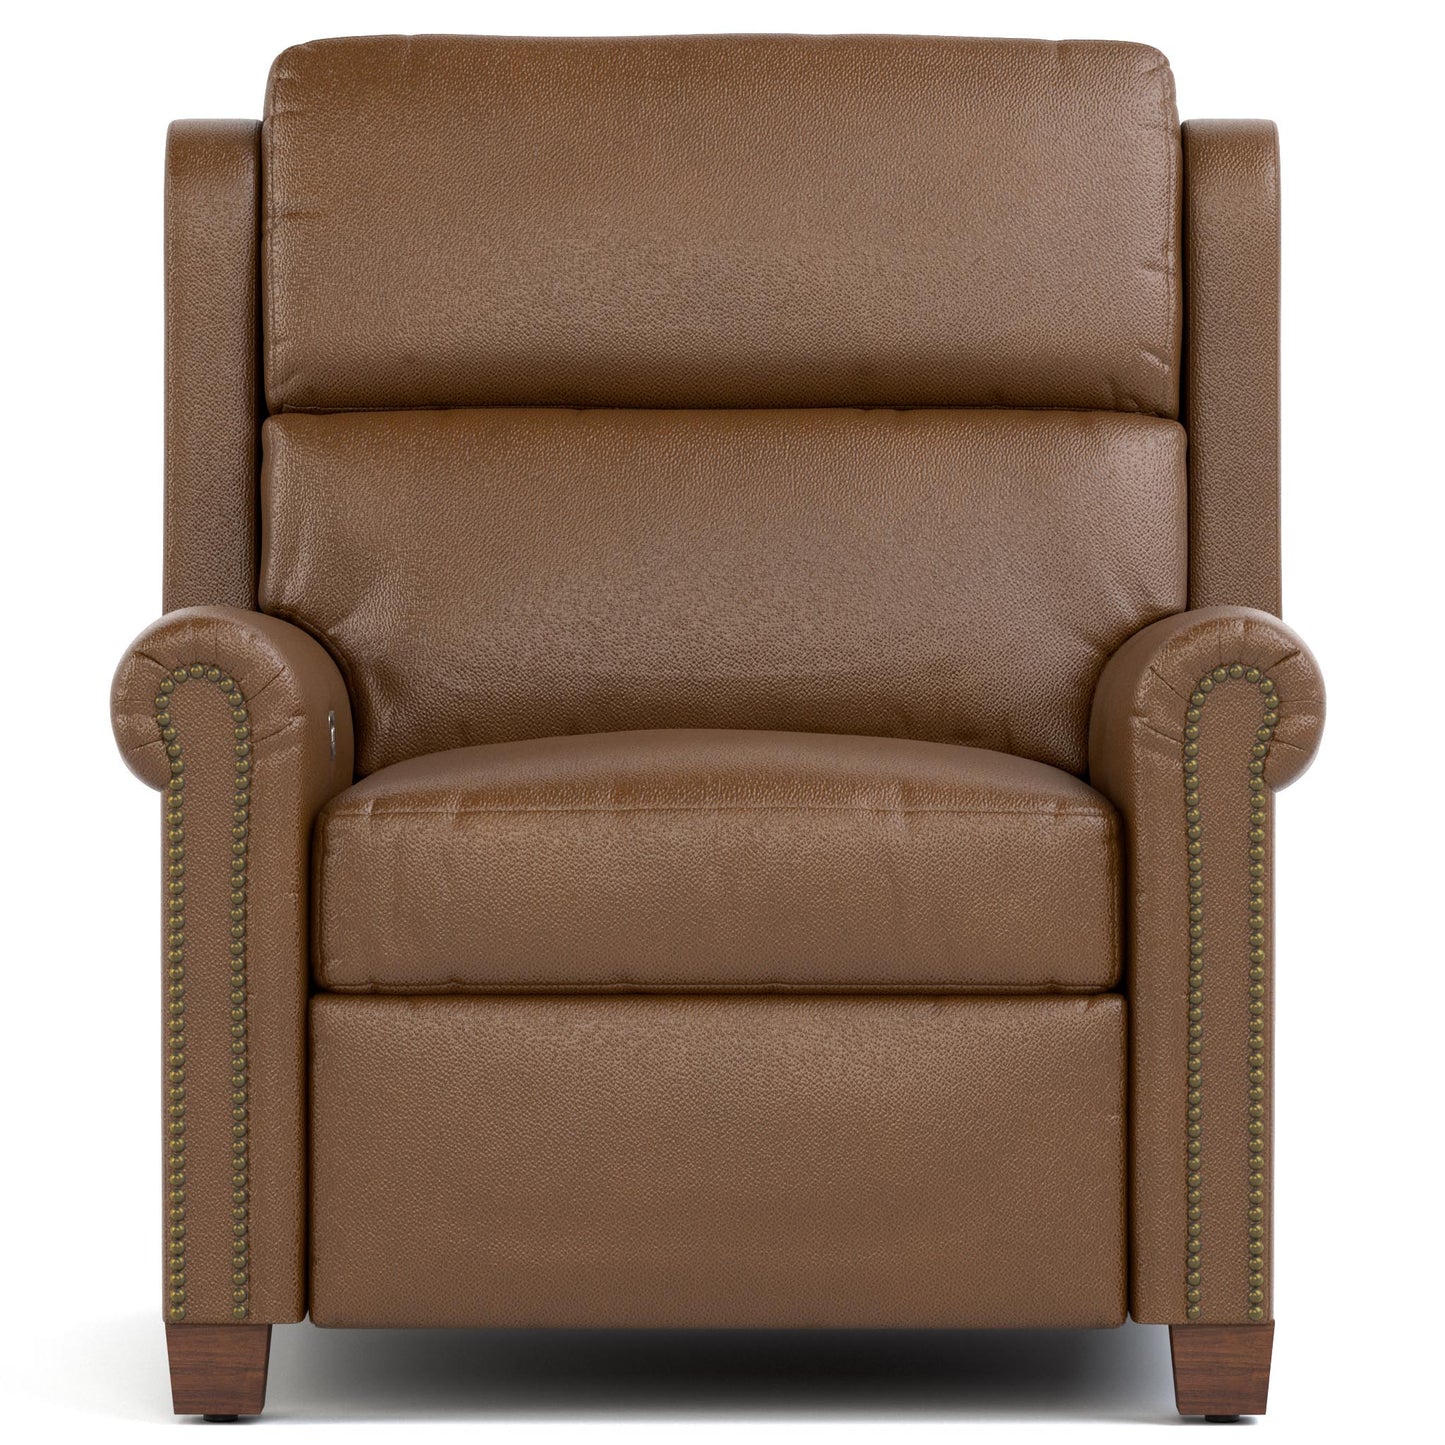 Woodlands Small Roll Arm Wall Recliner with Nails Selvano Bark - Front